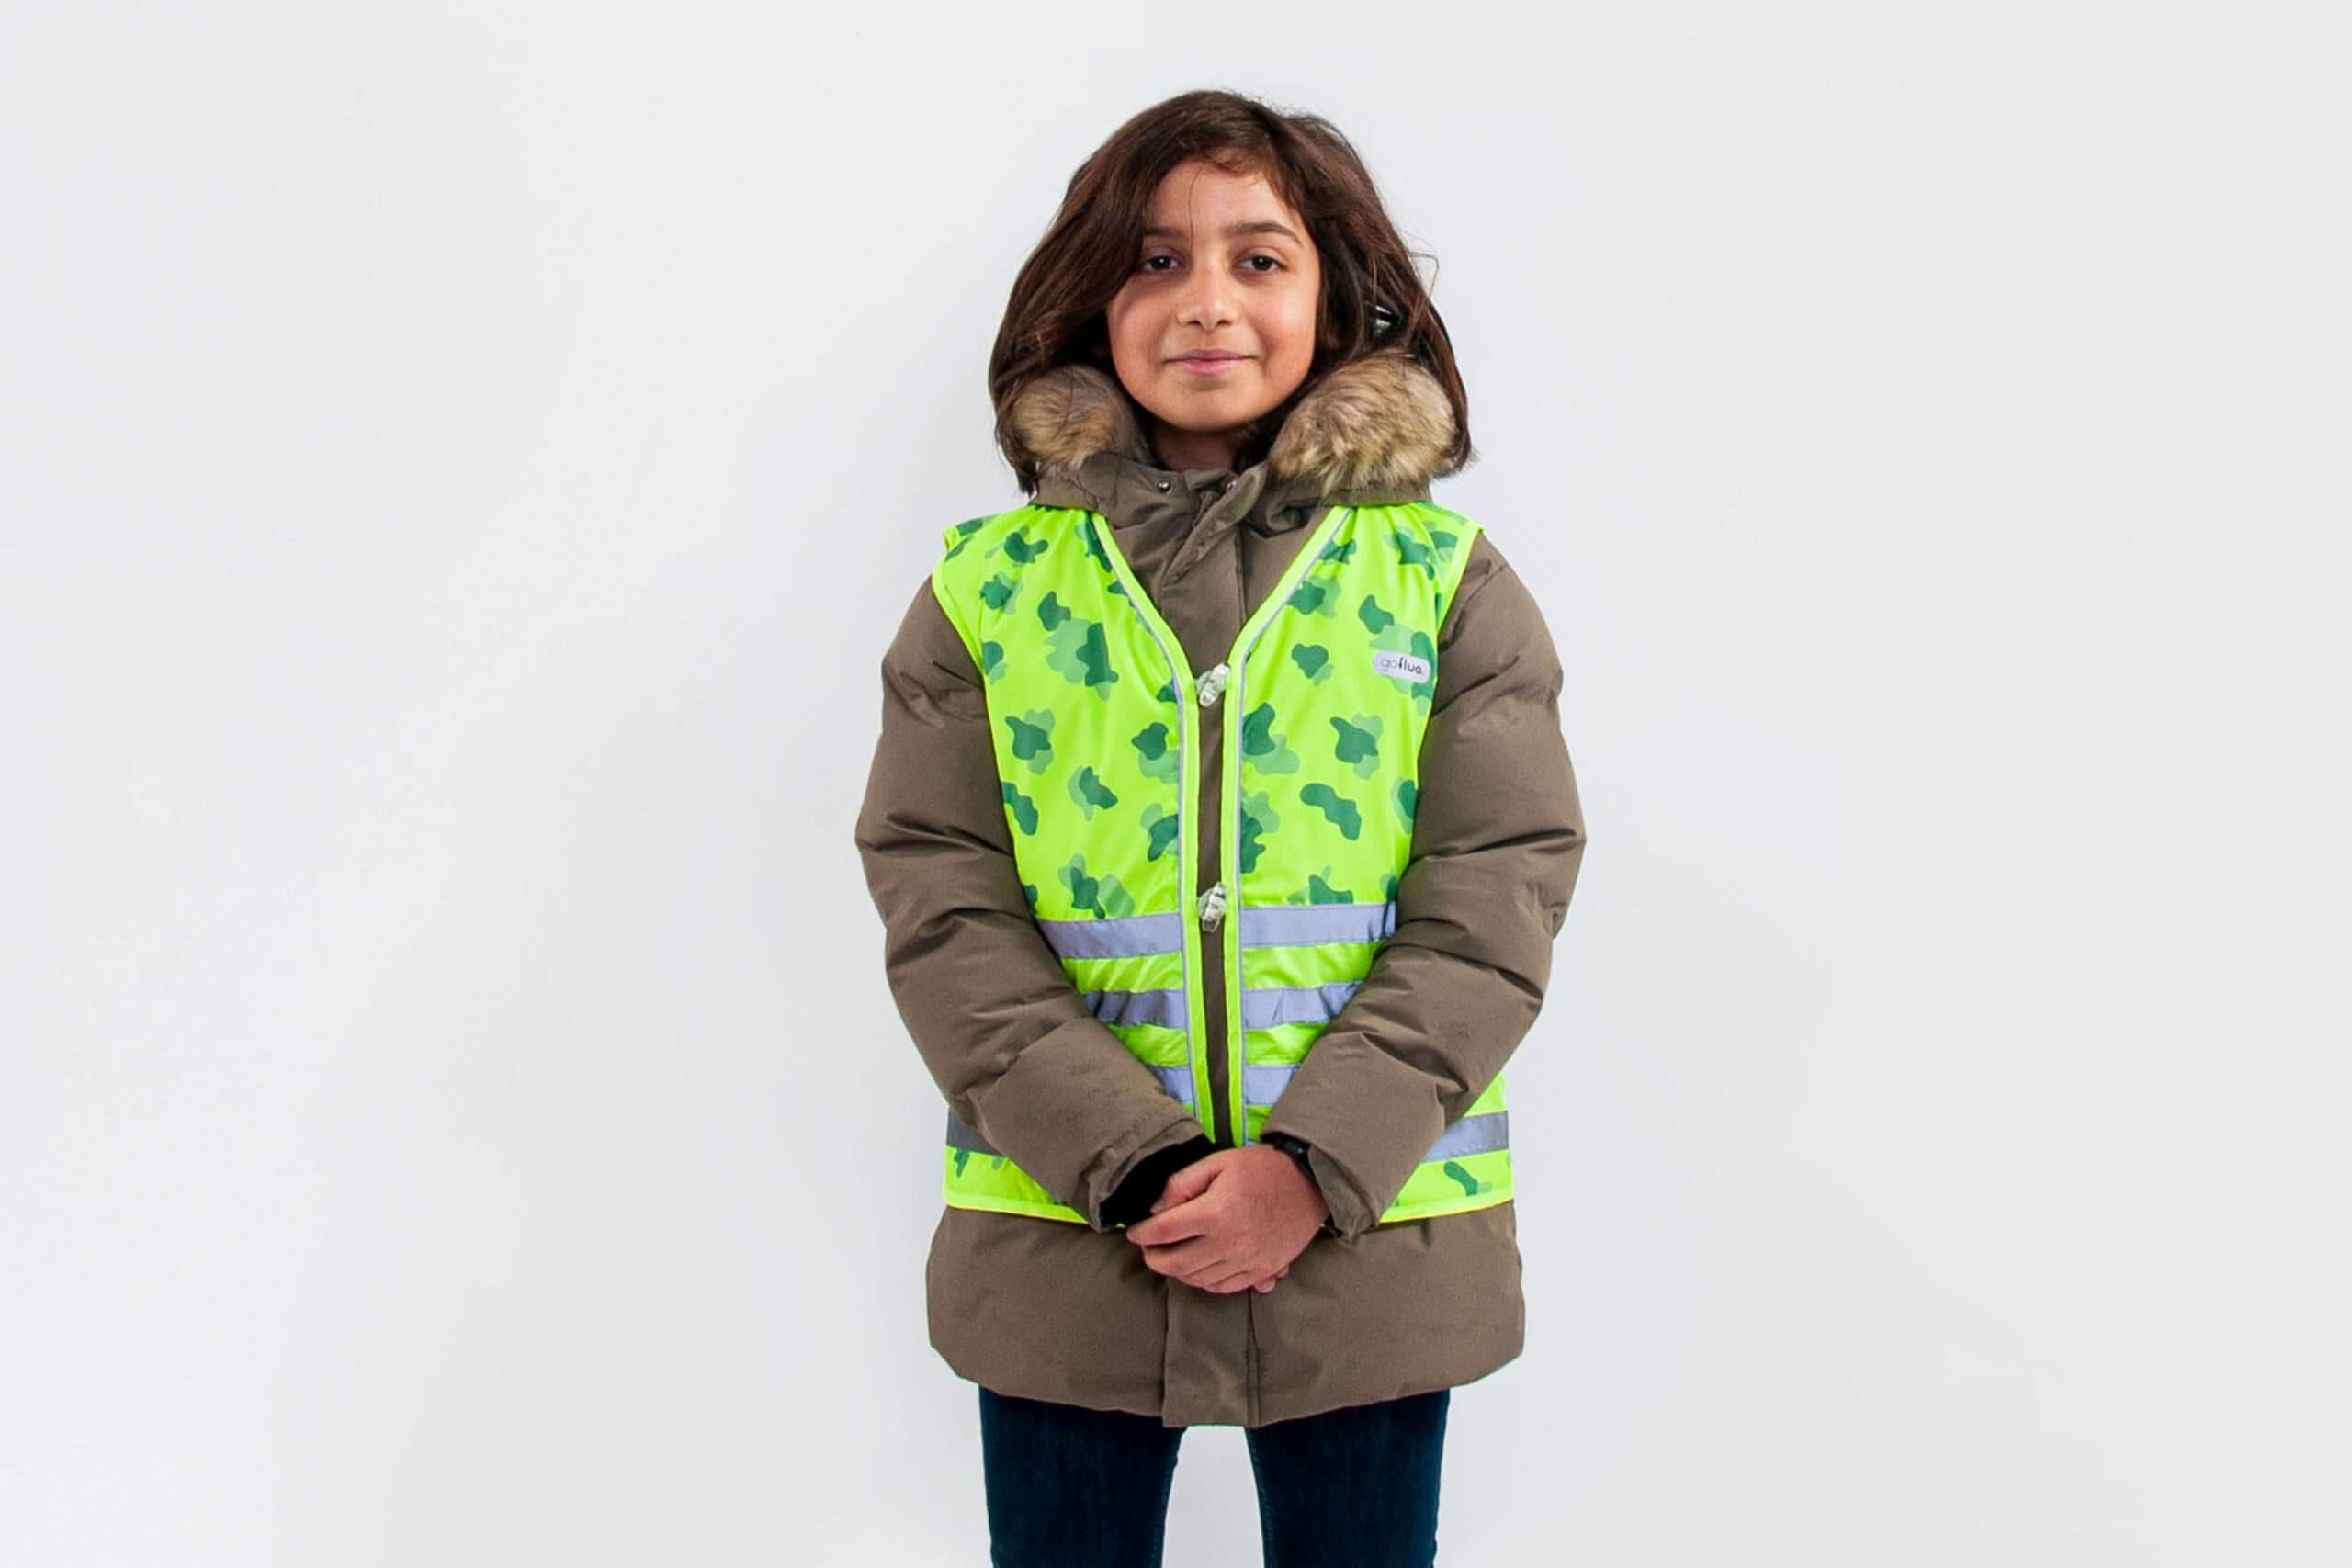 Bodyglowers for kids - Discover fun, original safety vests - gofluo